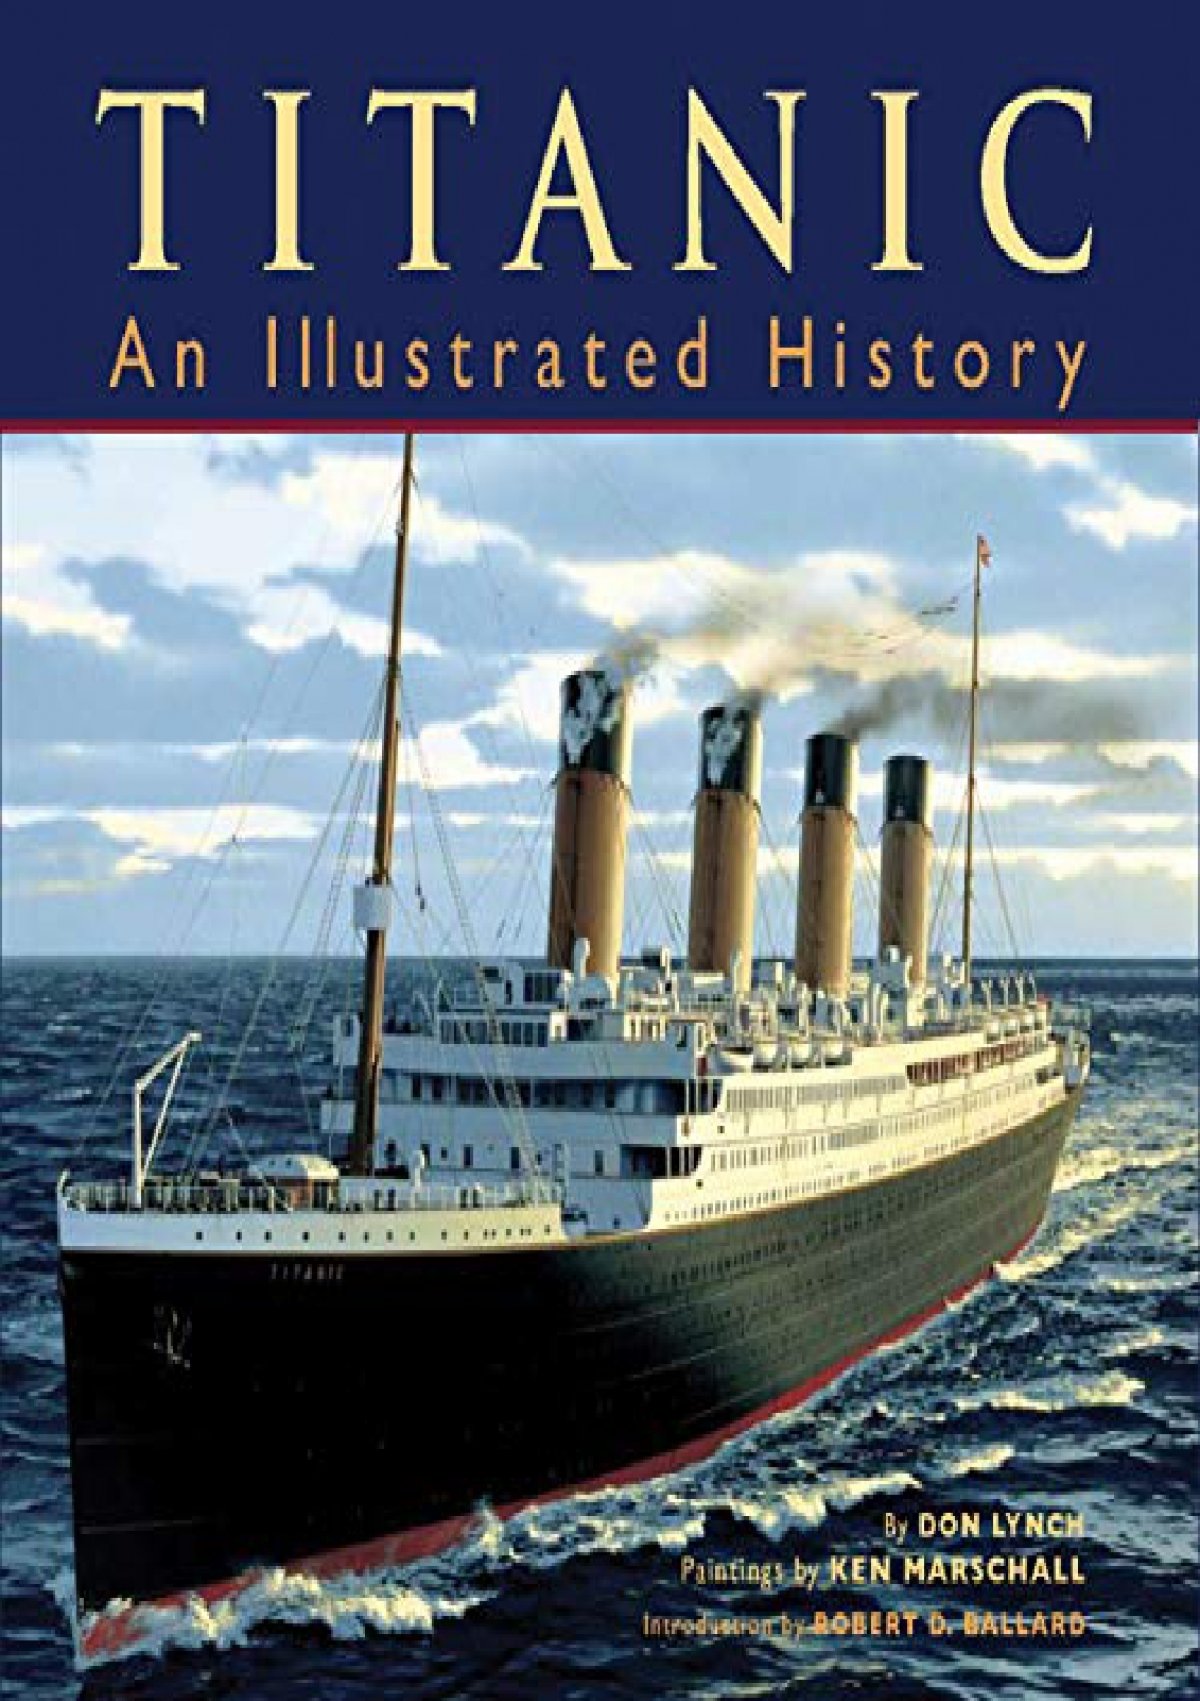 titanic an illustrated history pdf download